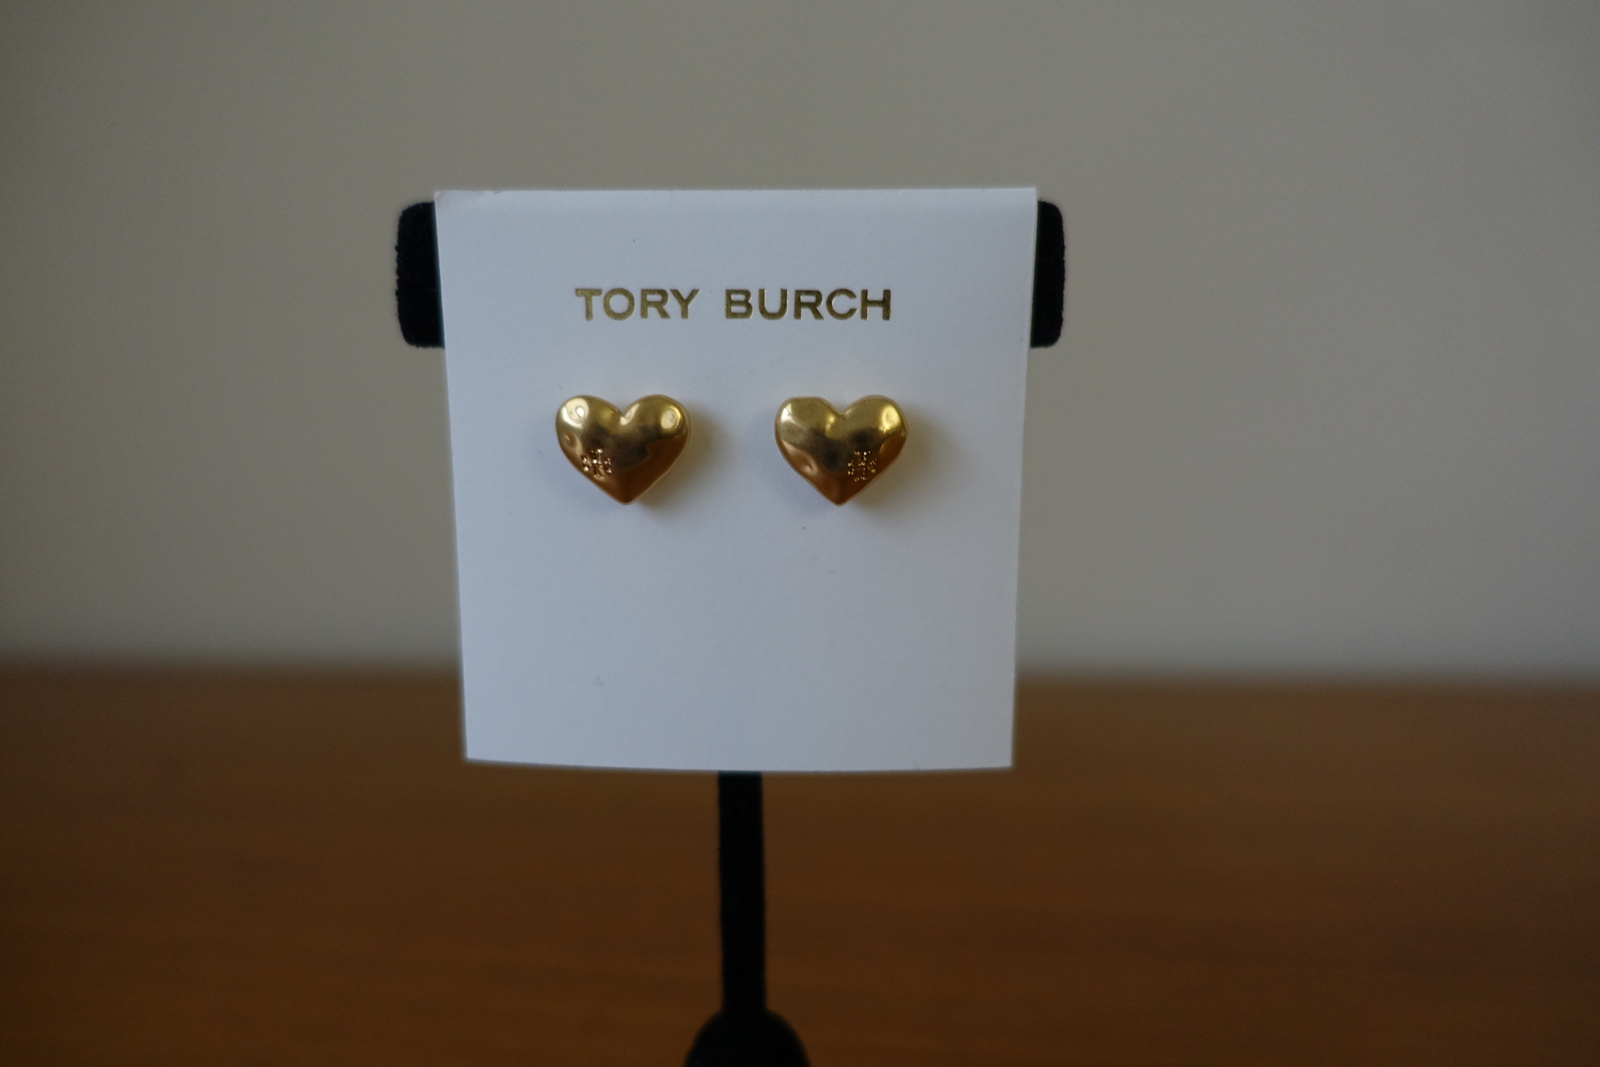 TORY BURCH HEART STUD GOLD COLOR EARRINGS. NEW - $54.99